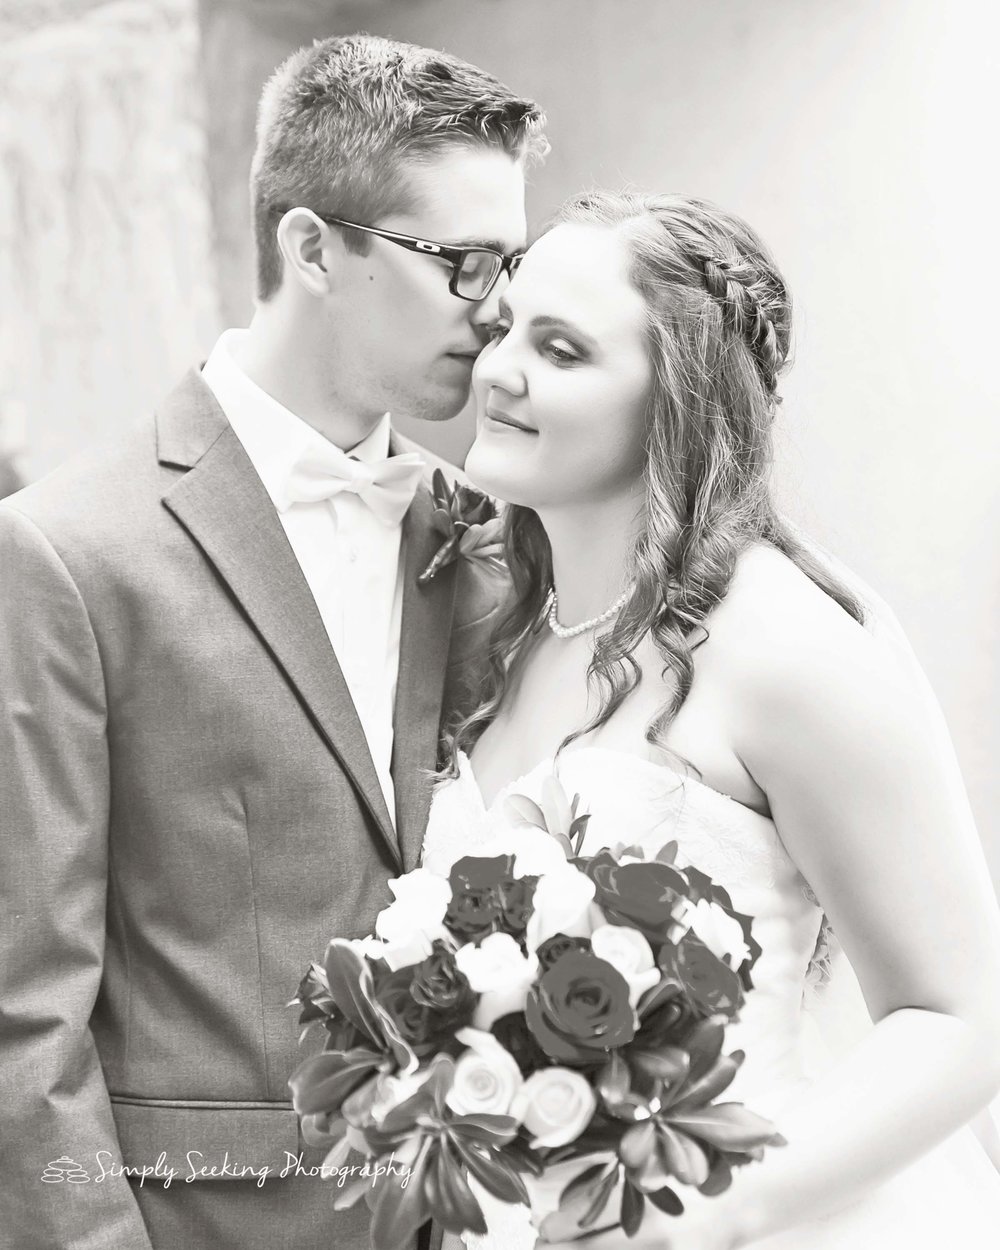 SSP spring wedding|bride and groom|black and white